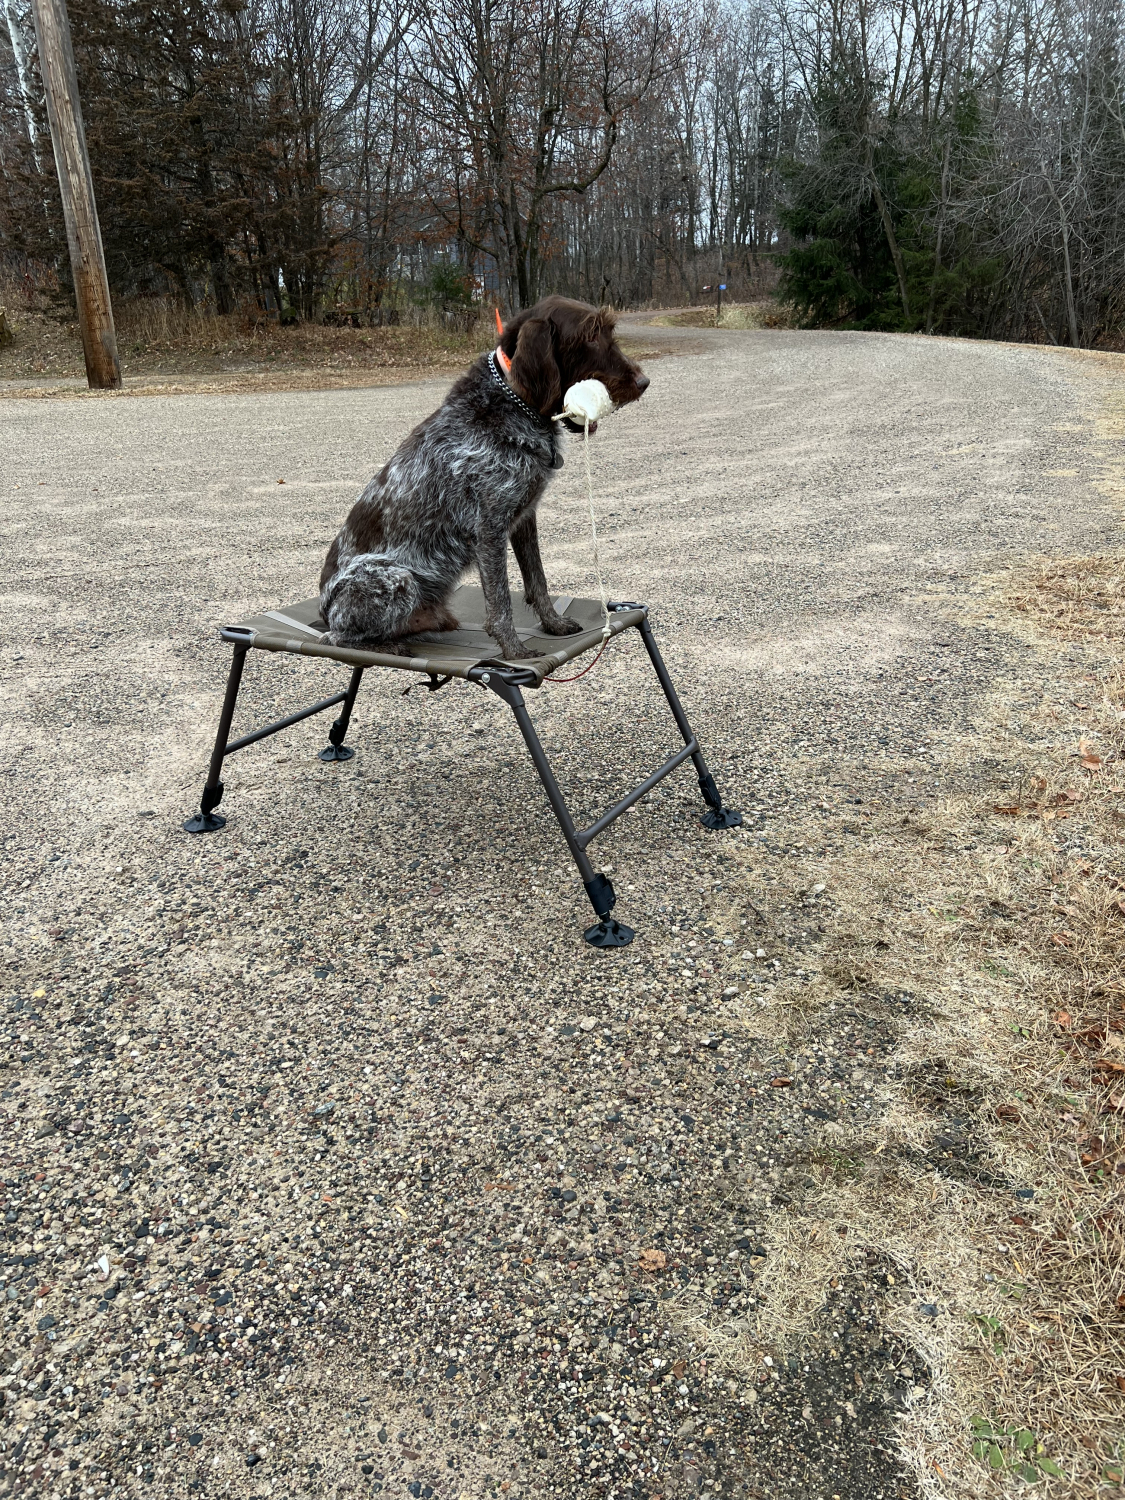 Homemade dog stands.new pics.. : Hunting Dog Forum - Page 5